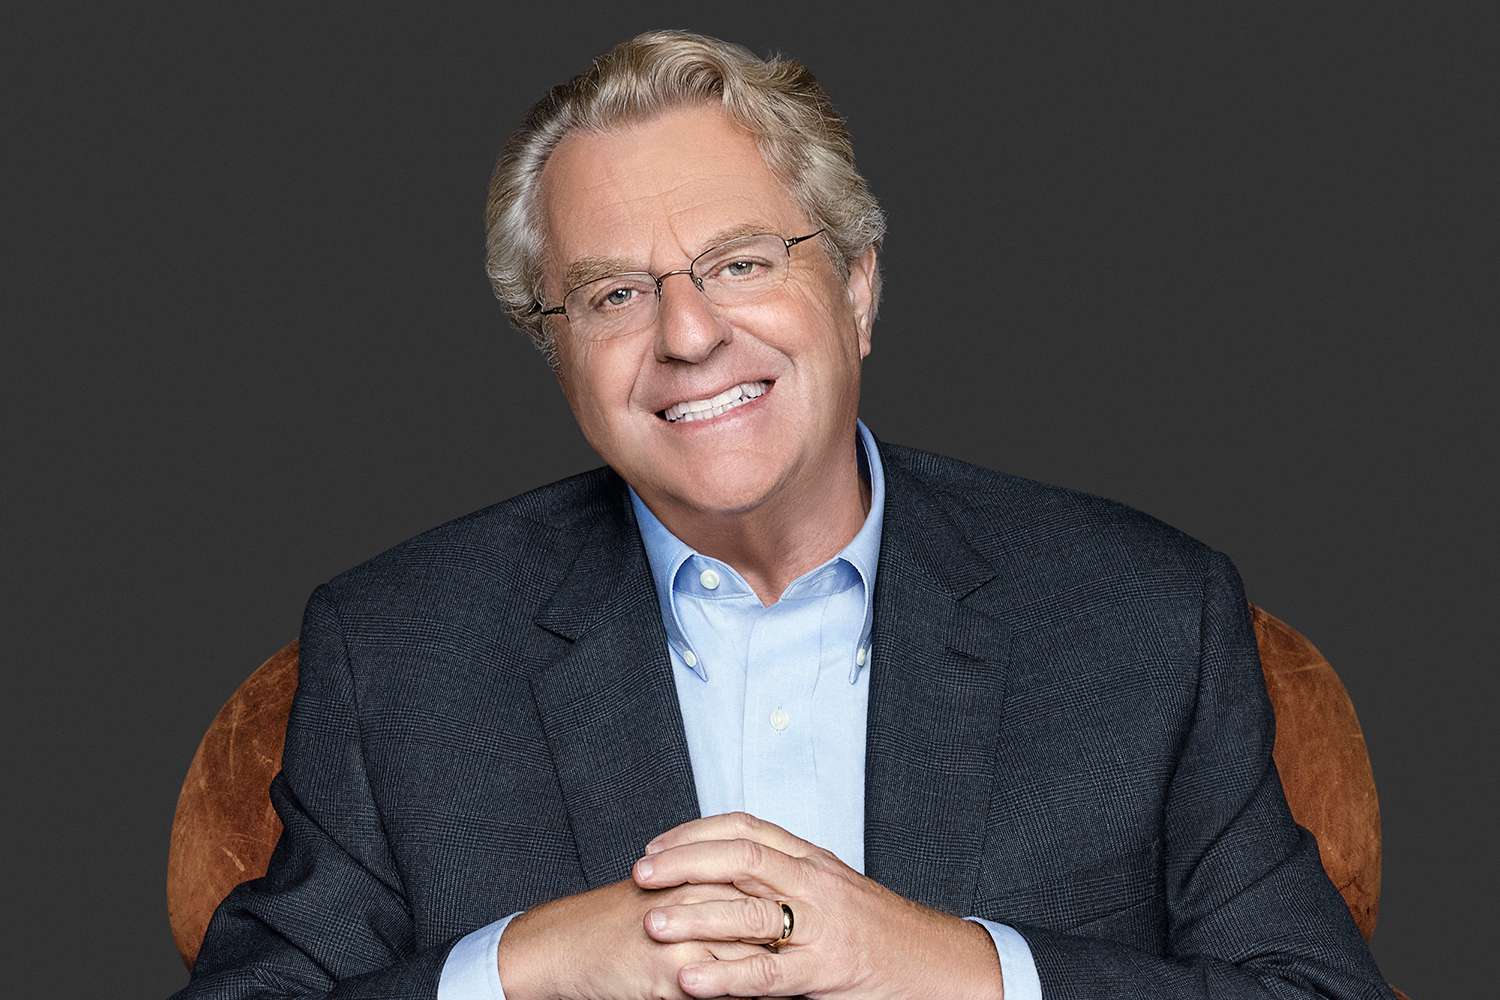 andrew ericsson recommends Pictures Of Jerry Springer